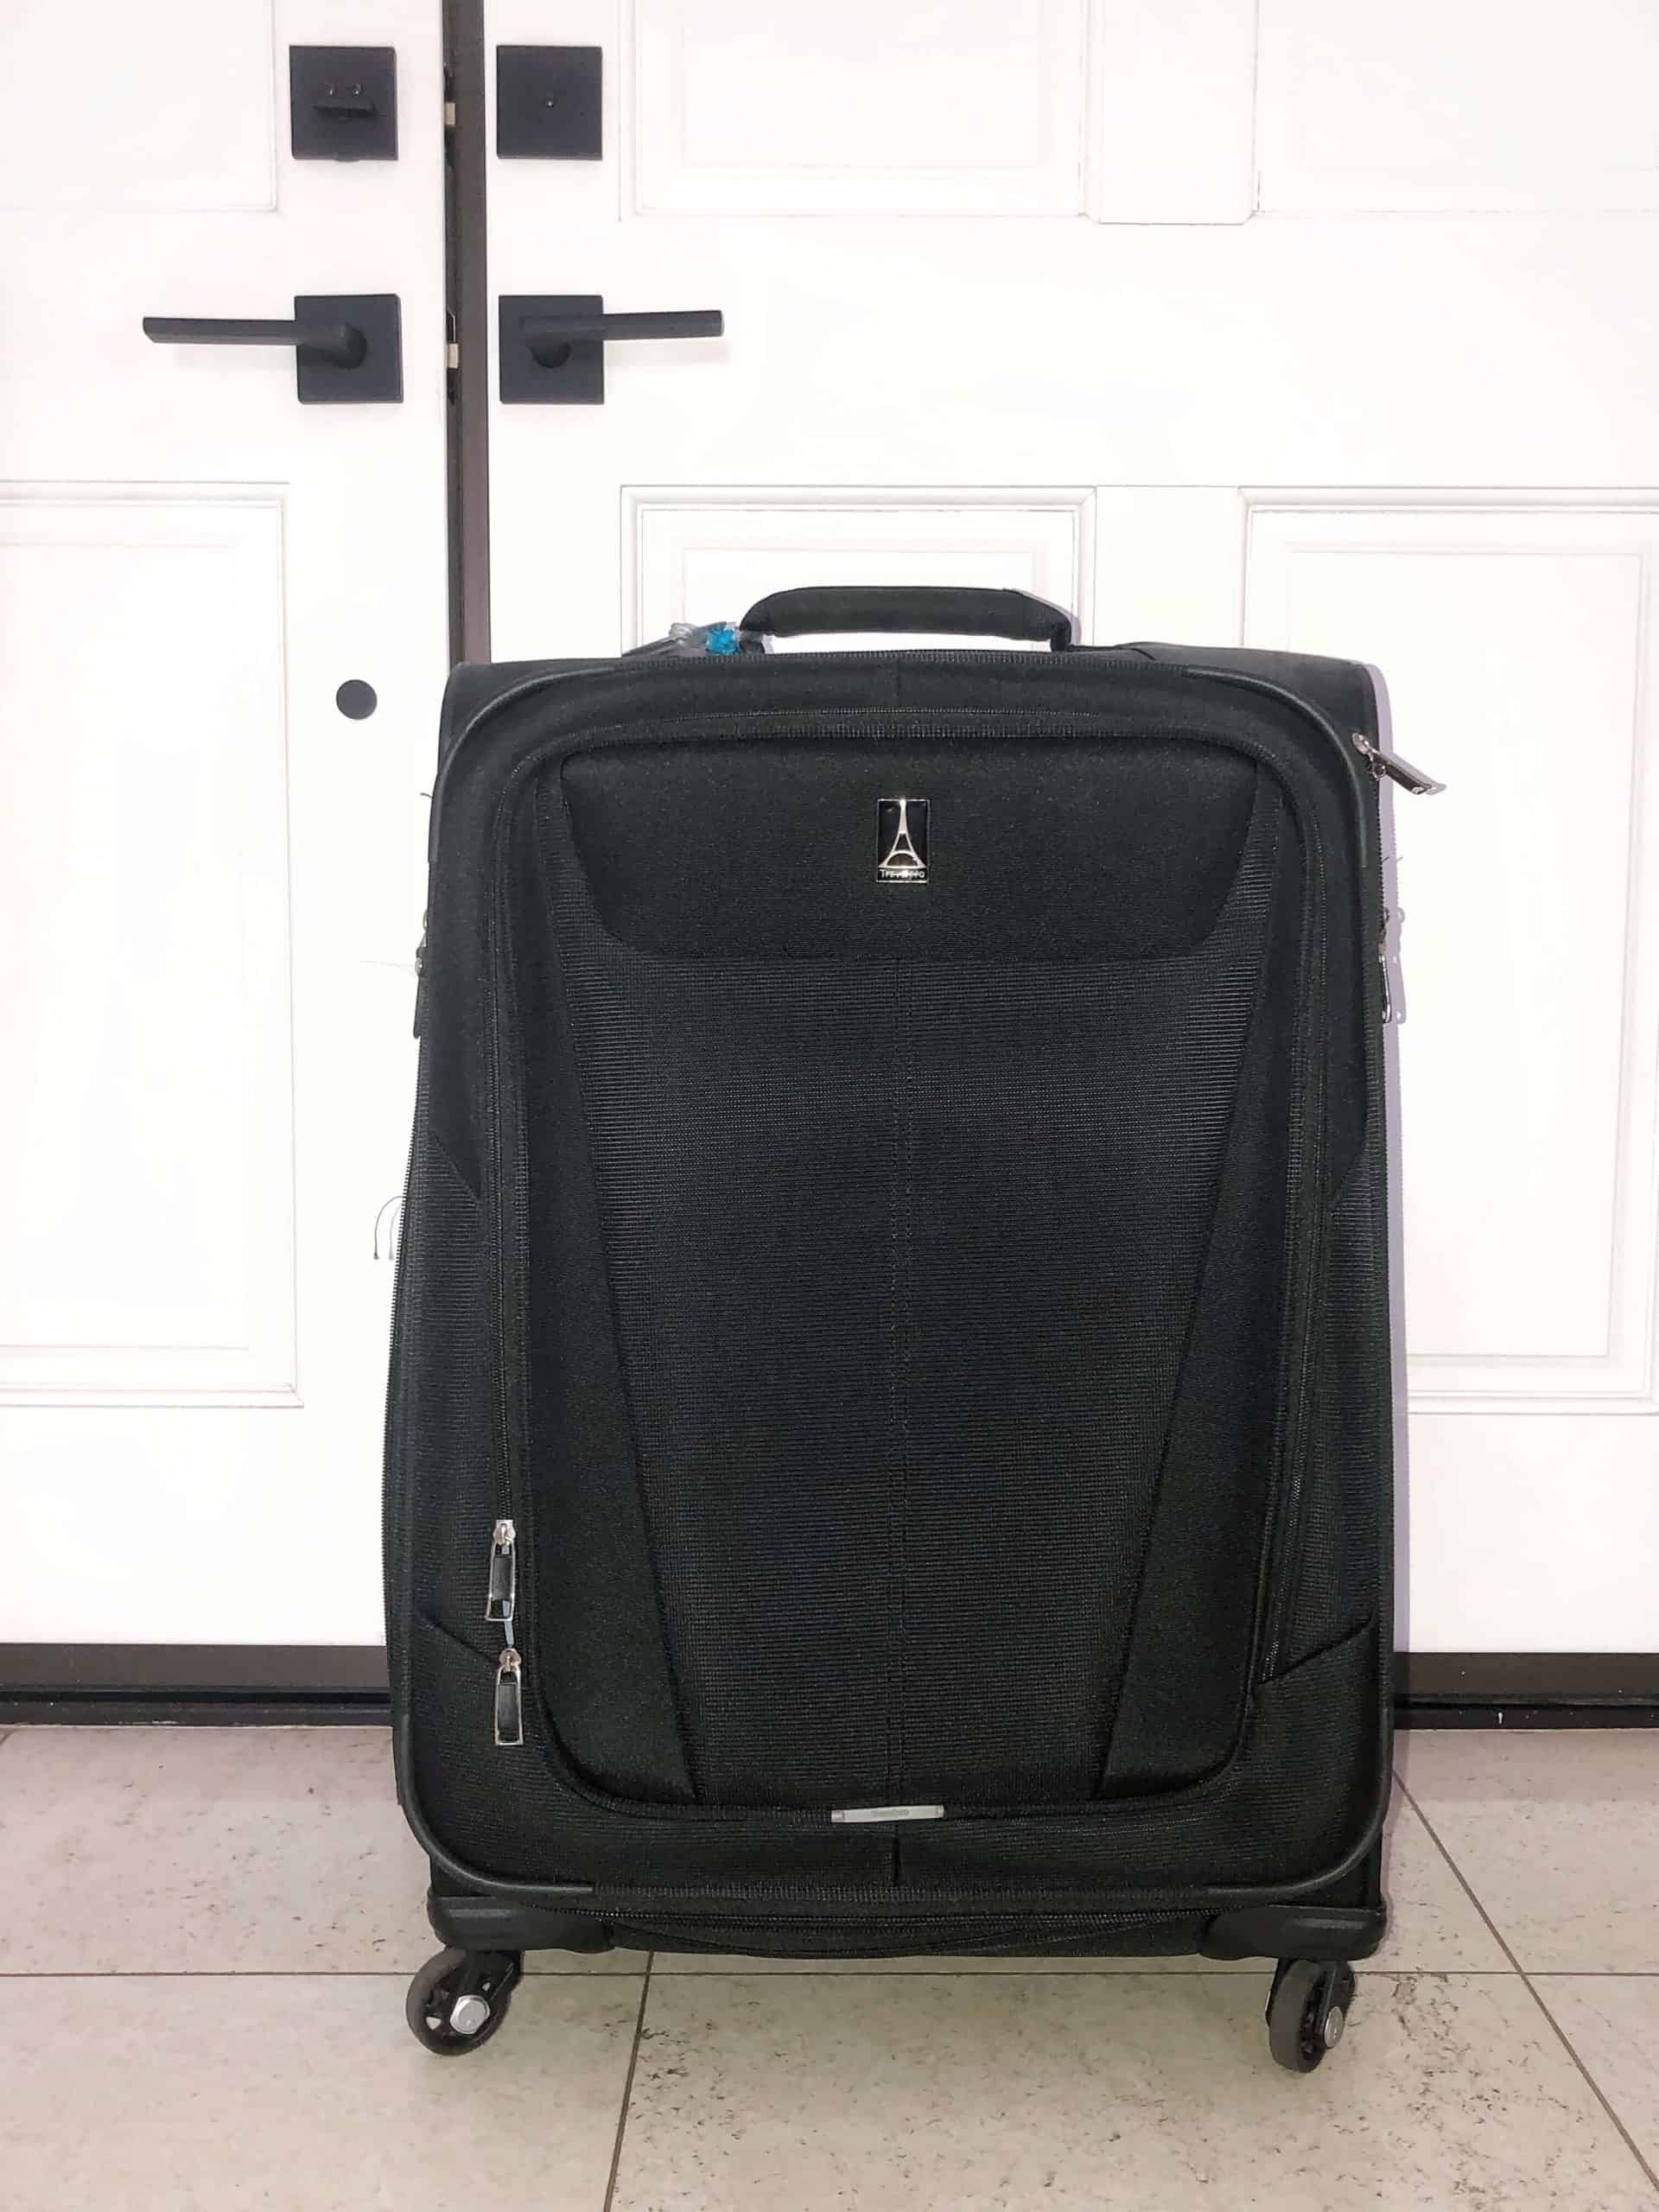 Travelpro MaxLite 5 Review: This Should Be Your Go-to Suitcase - World ...